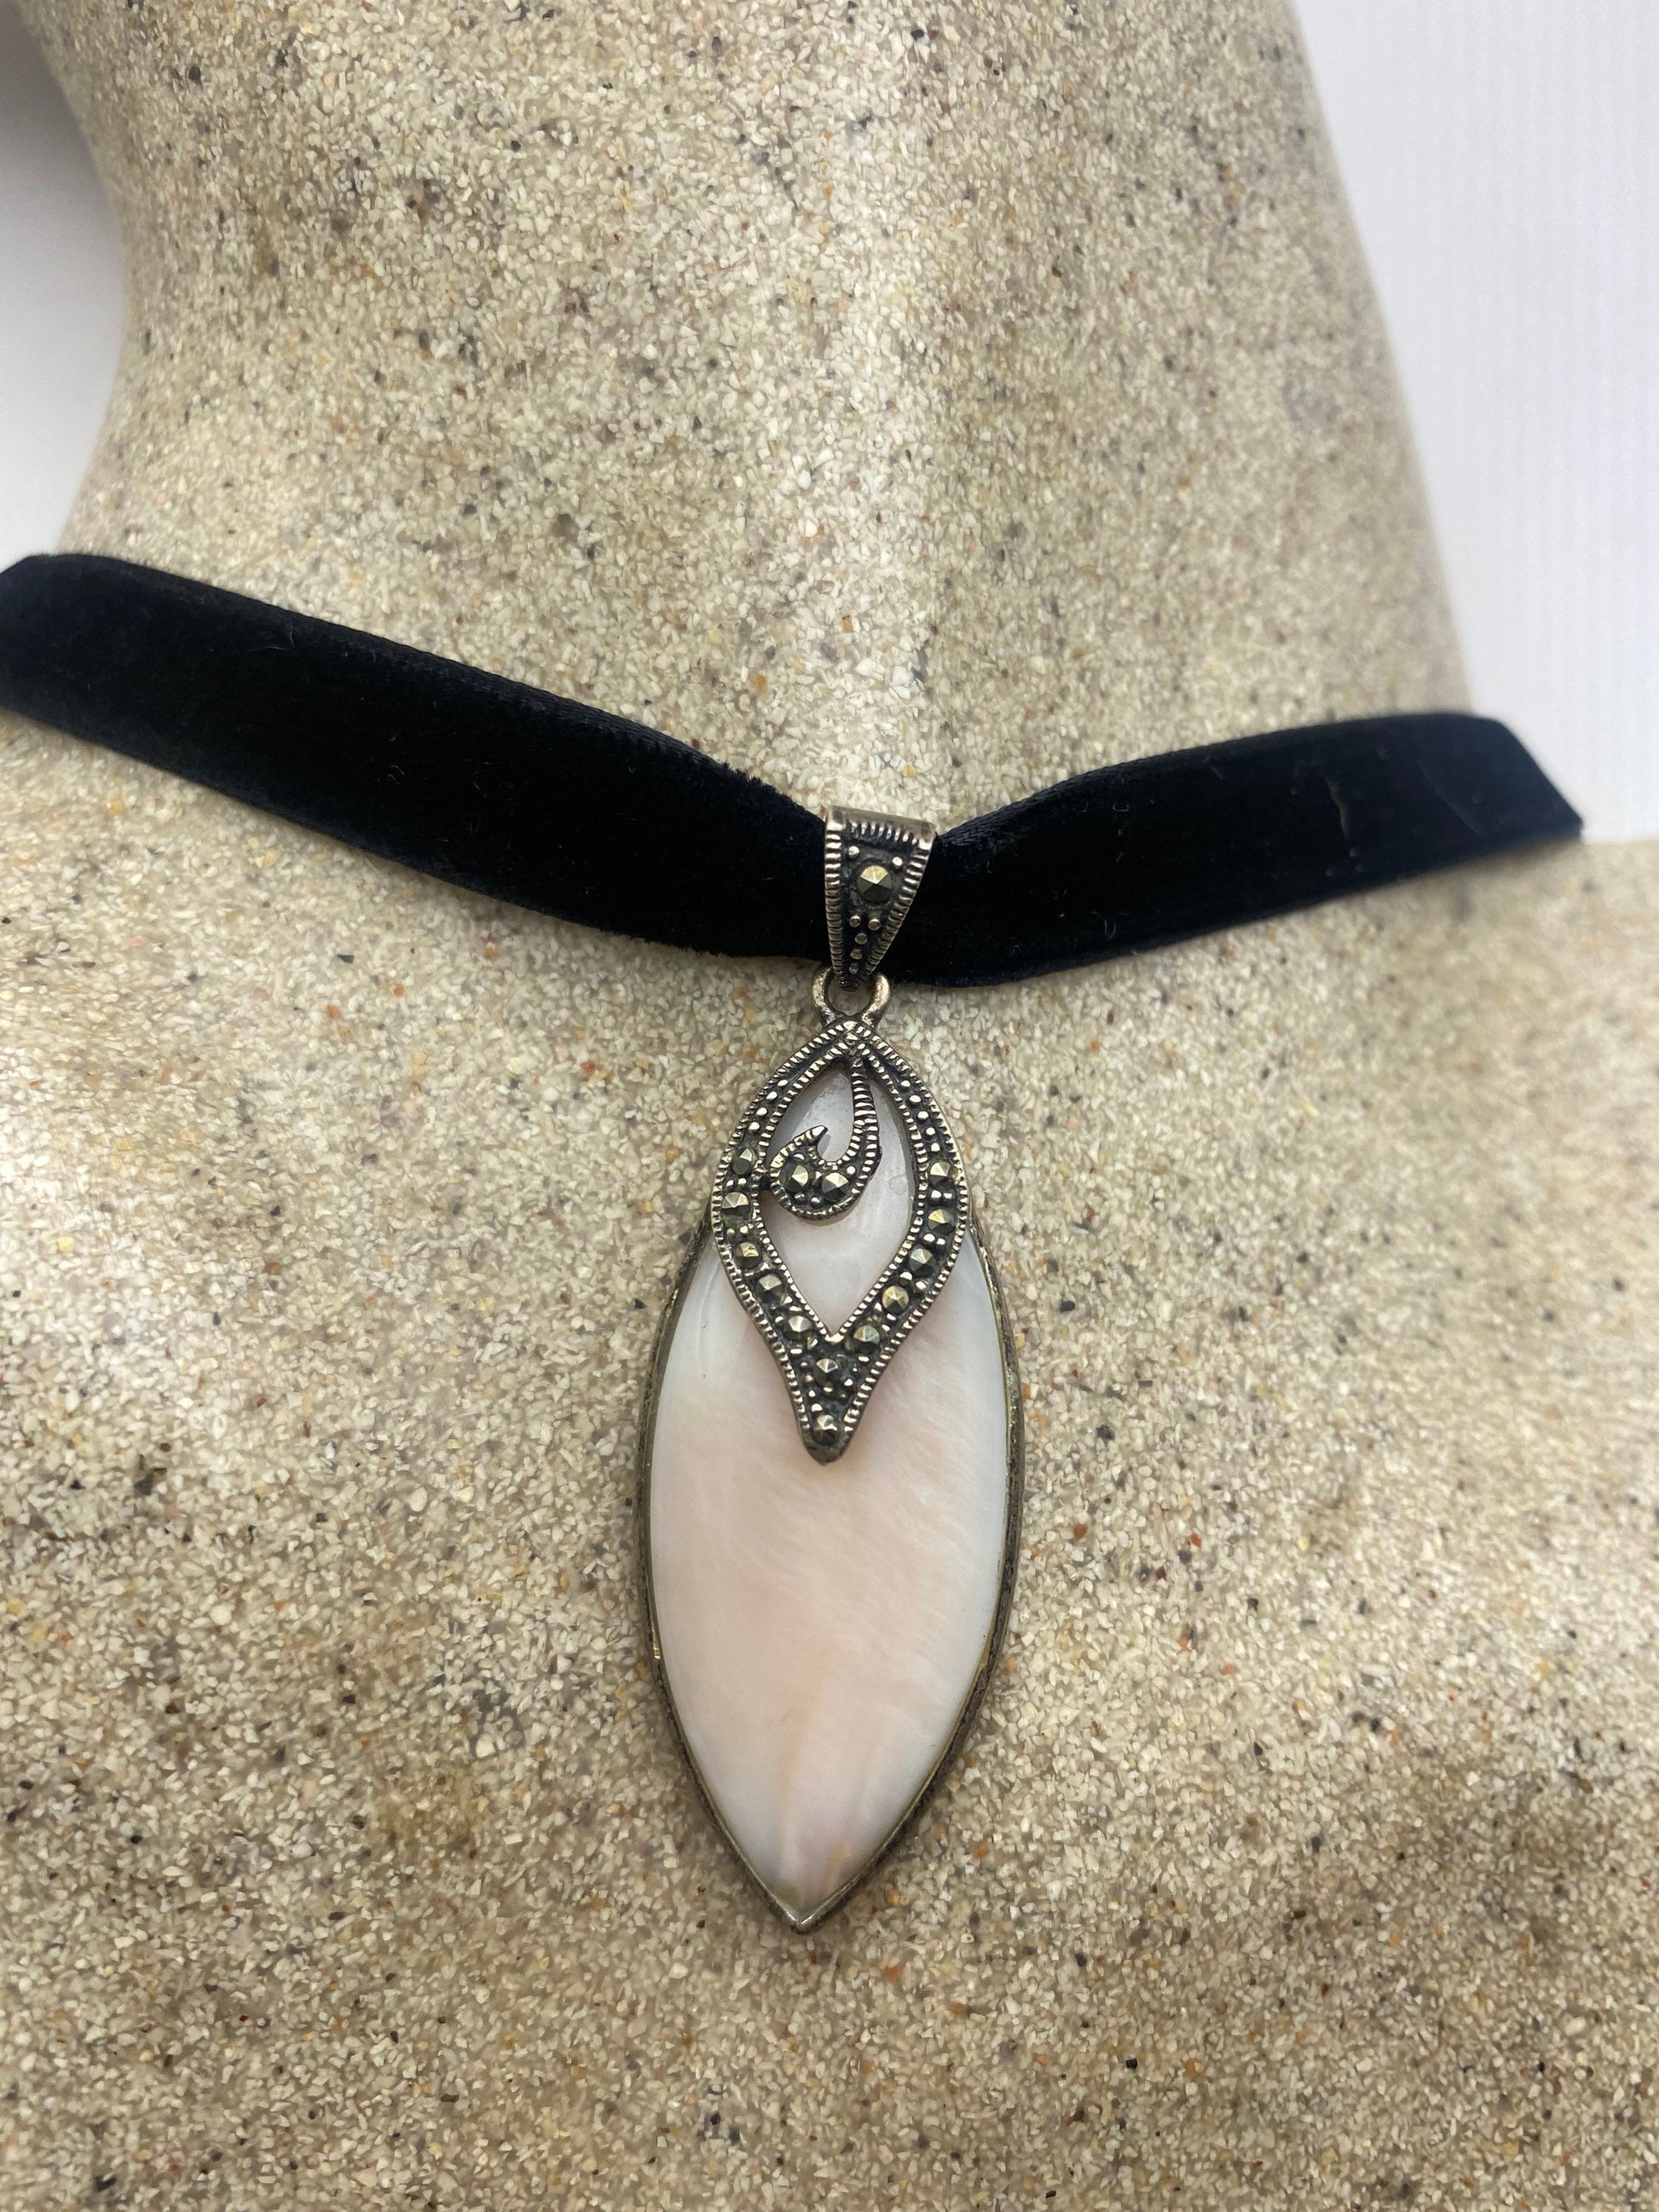 Vintage Marcasite 925 Sterling Silver Mother of Pearl Pendant Necklace